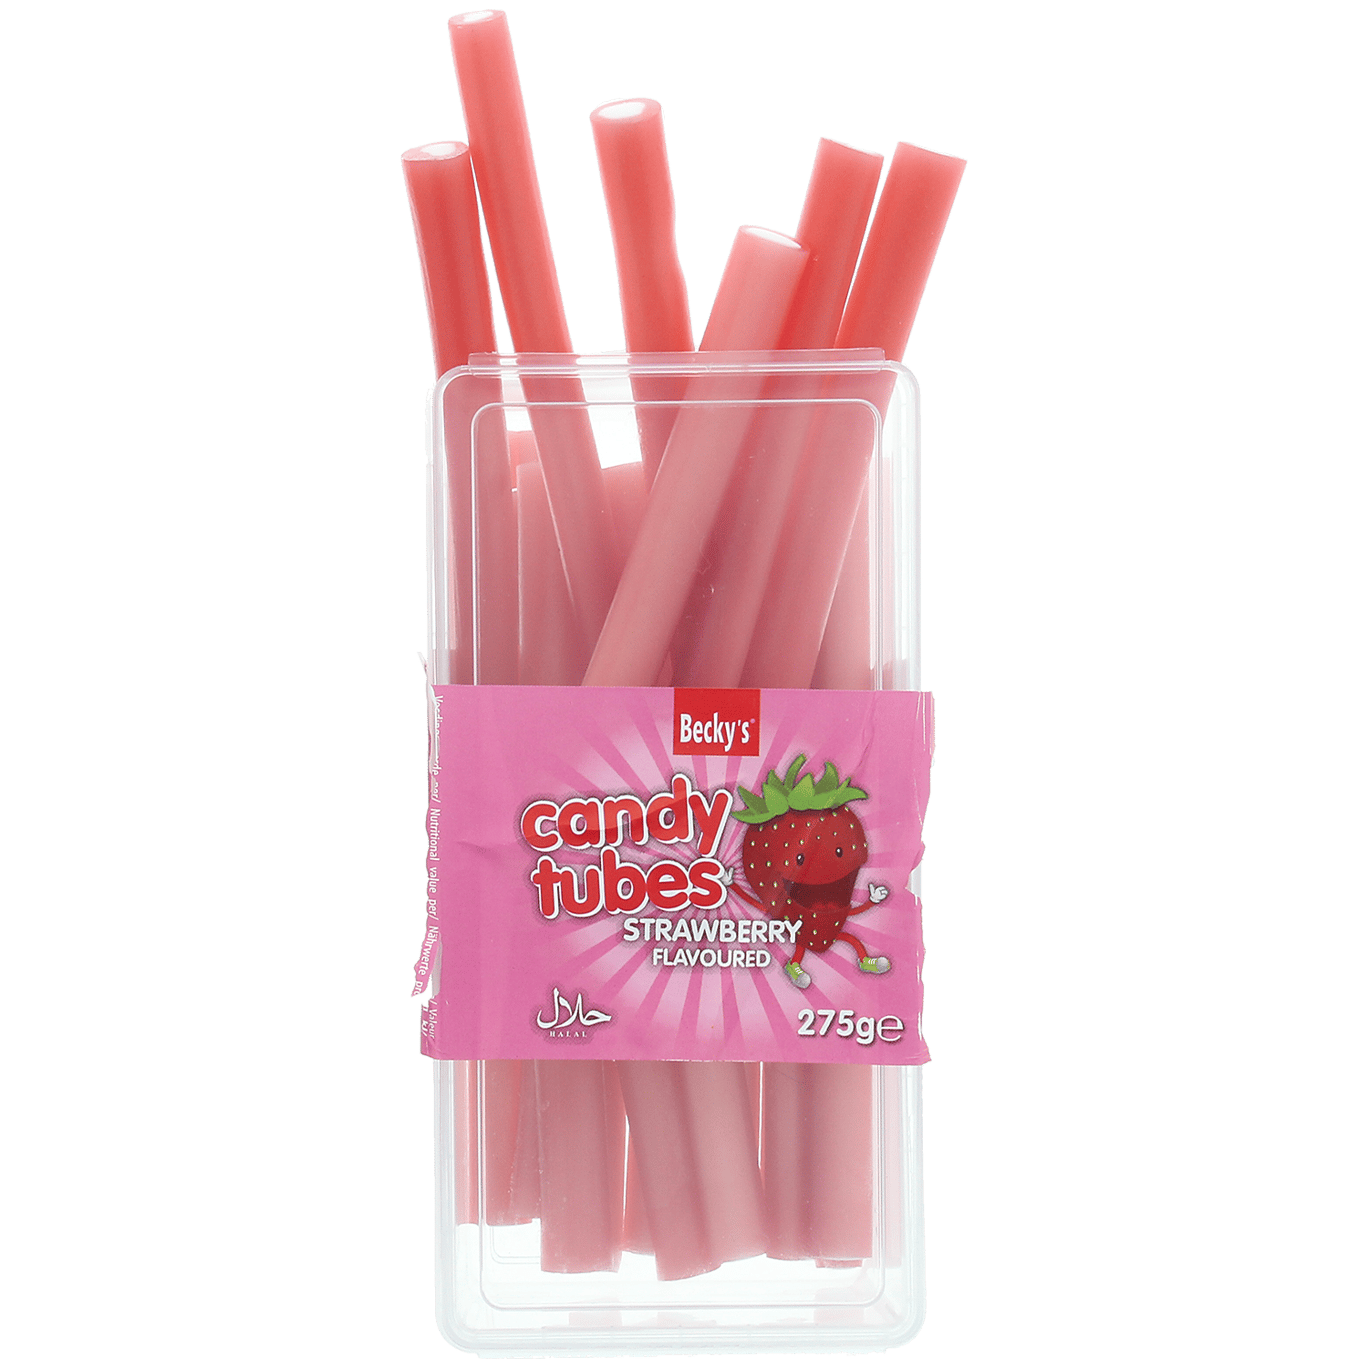 Beckys Candy Tubes 